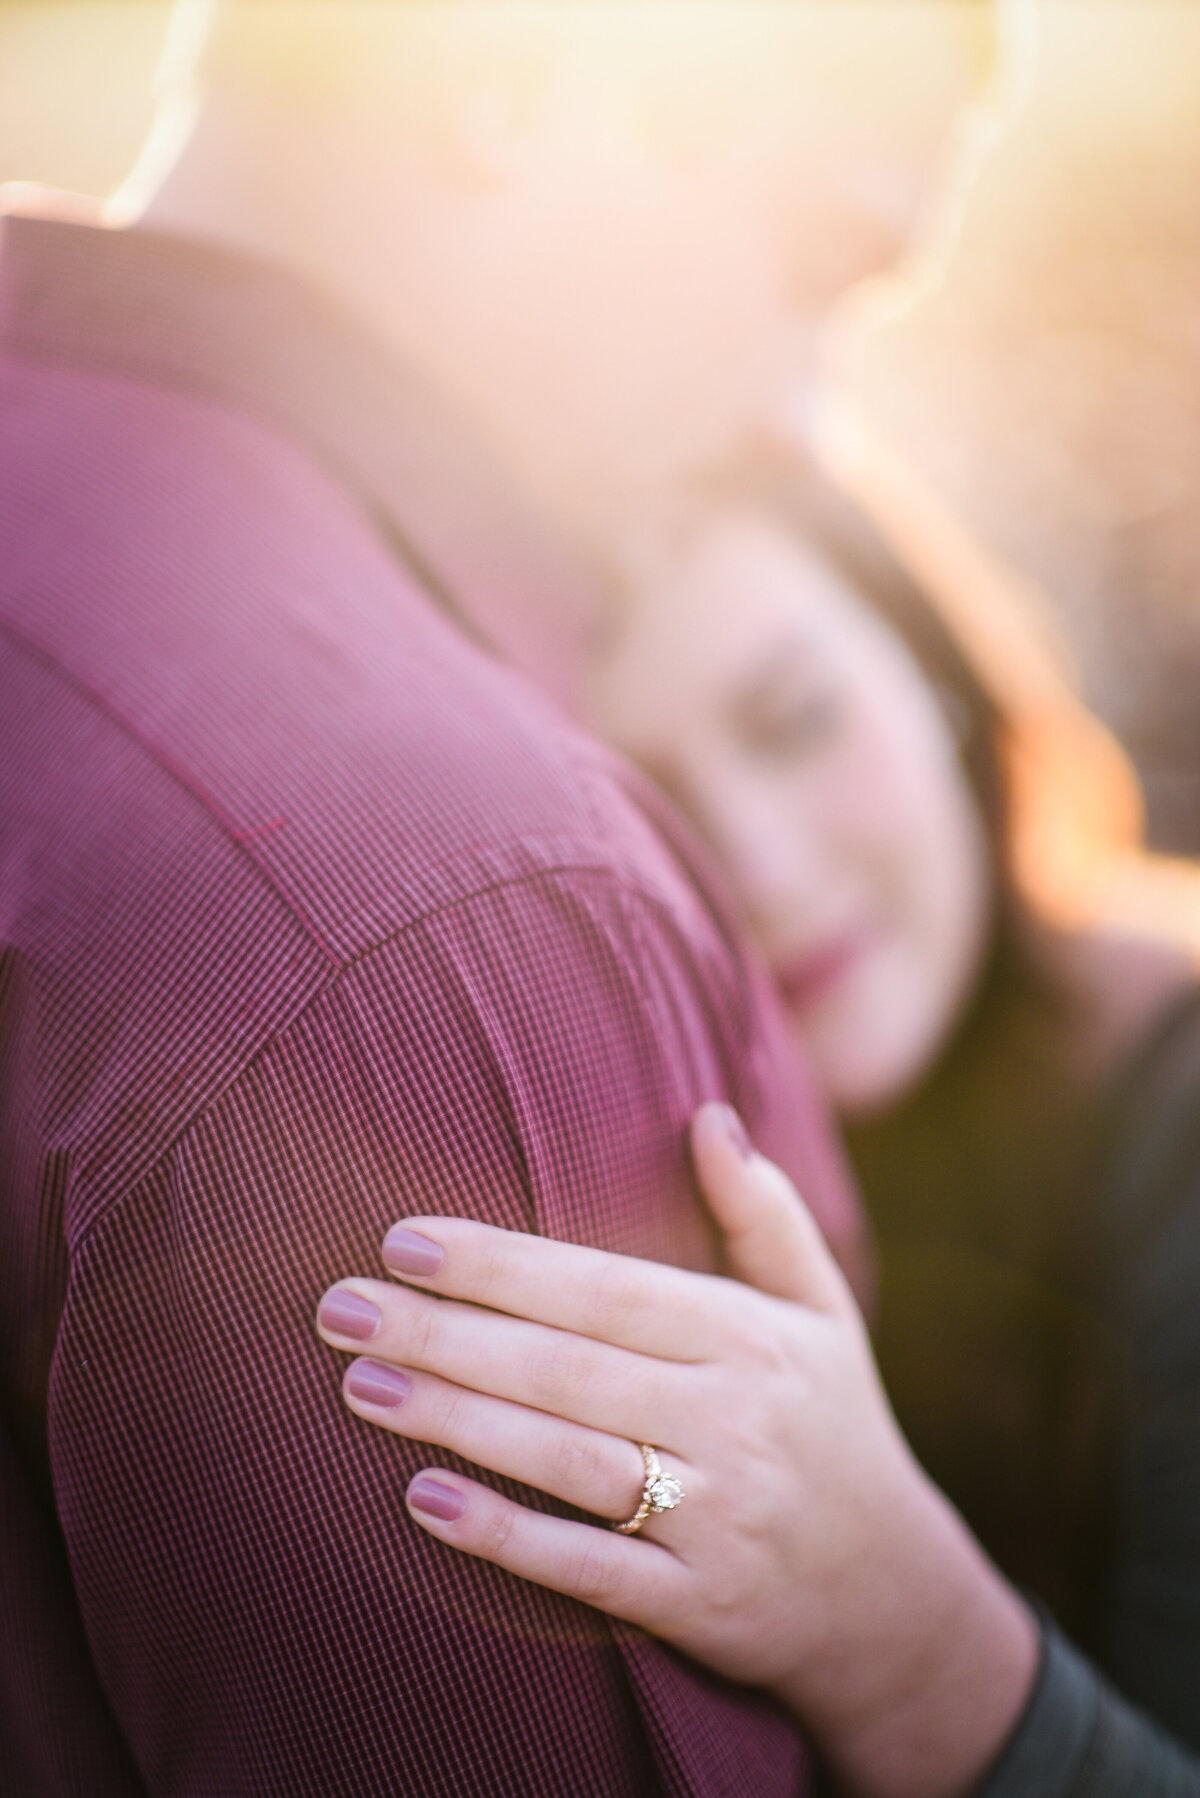 Beautiful Mississippi Engagement Photography: bride to be shows off ring during sunset cotton field session in Mississippi